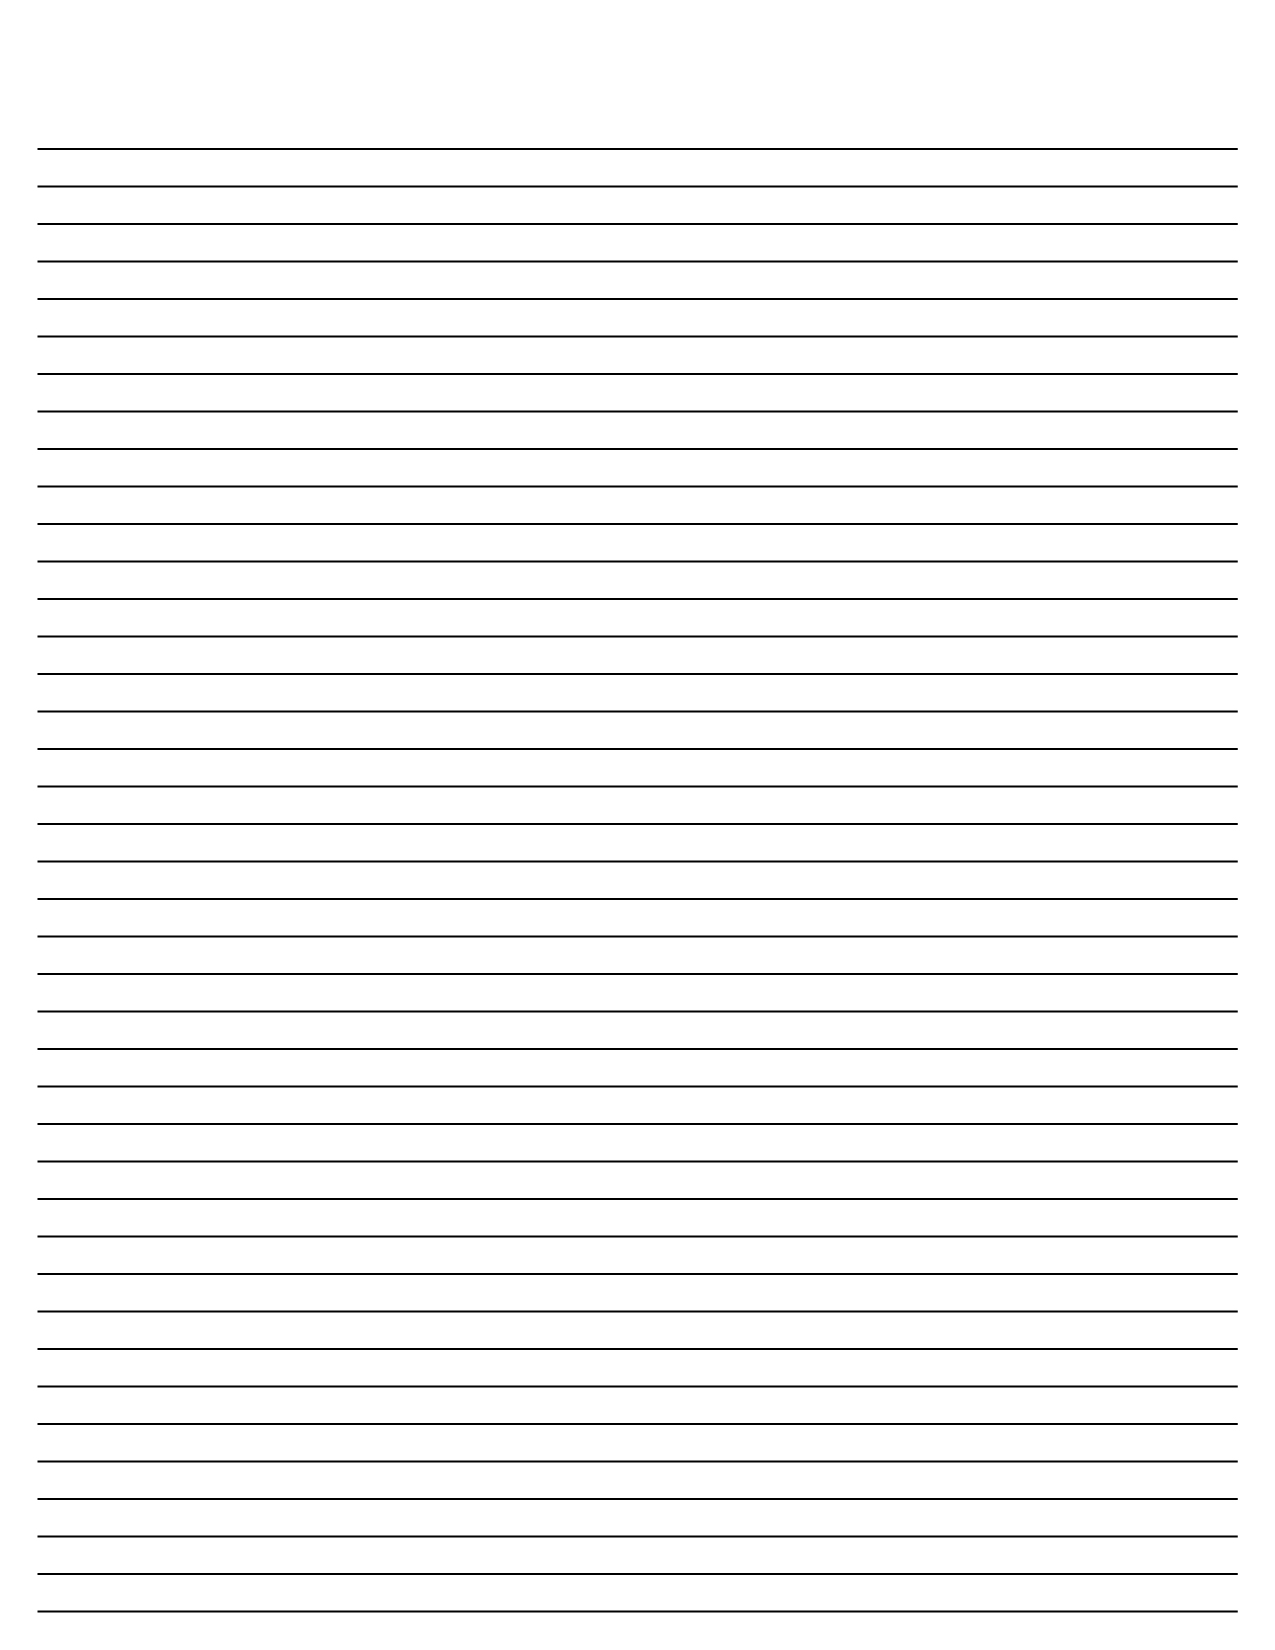 9 Best Images Of Printable Journal Paper With Lines Free Printable 